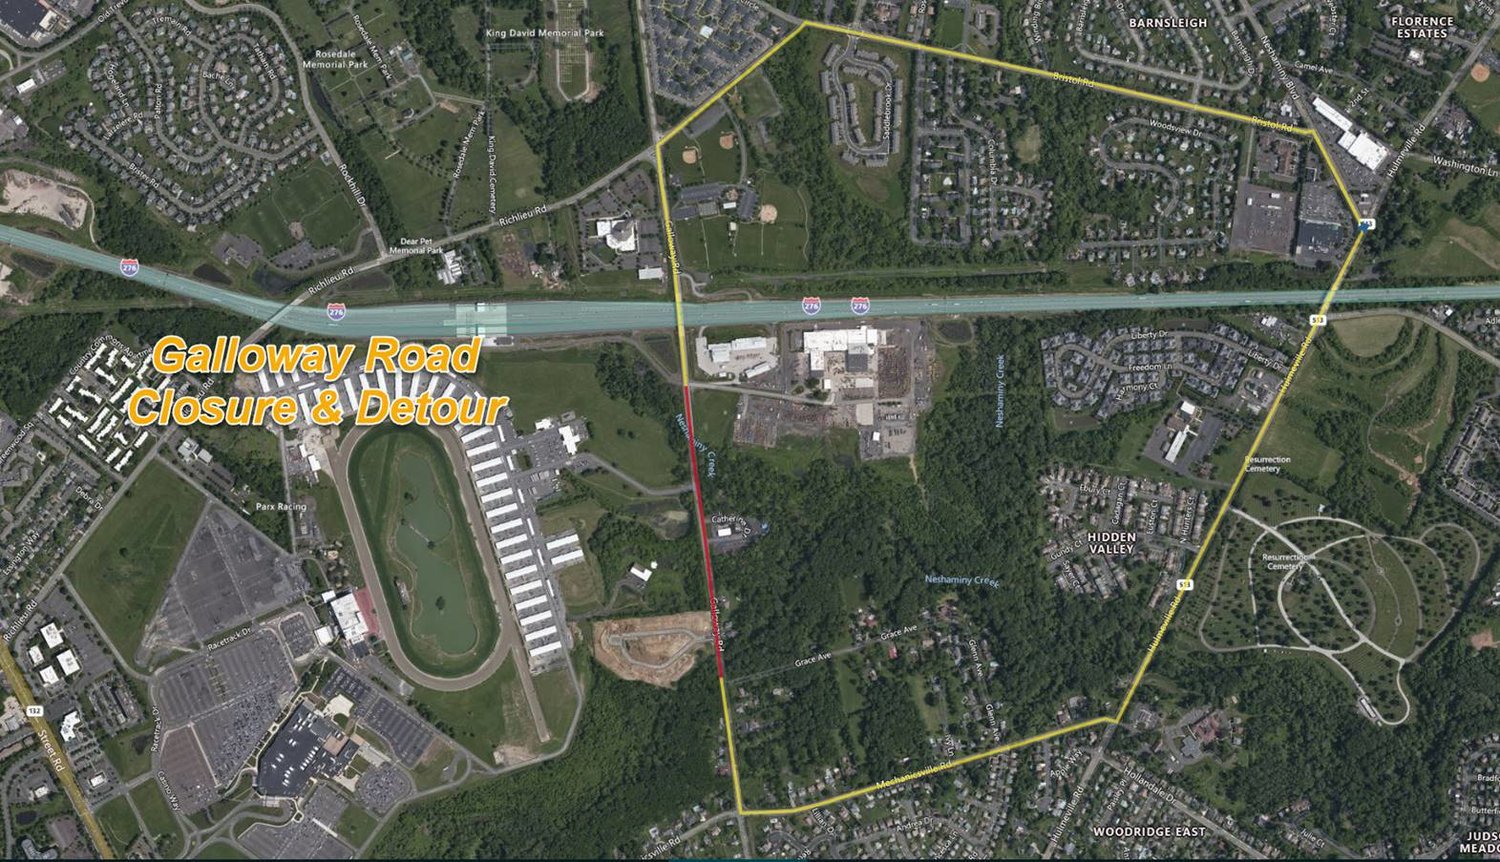 Galloway Road will be closed and detoured over Branch of Neshaminy Creek between Grace Avenue and the Pennsylvania Turnpike (I-276) in Bensalem Township.